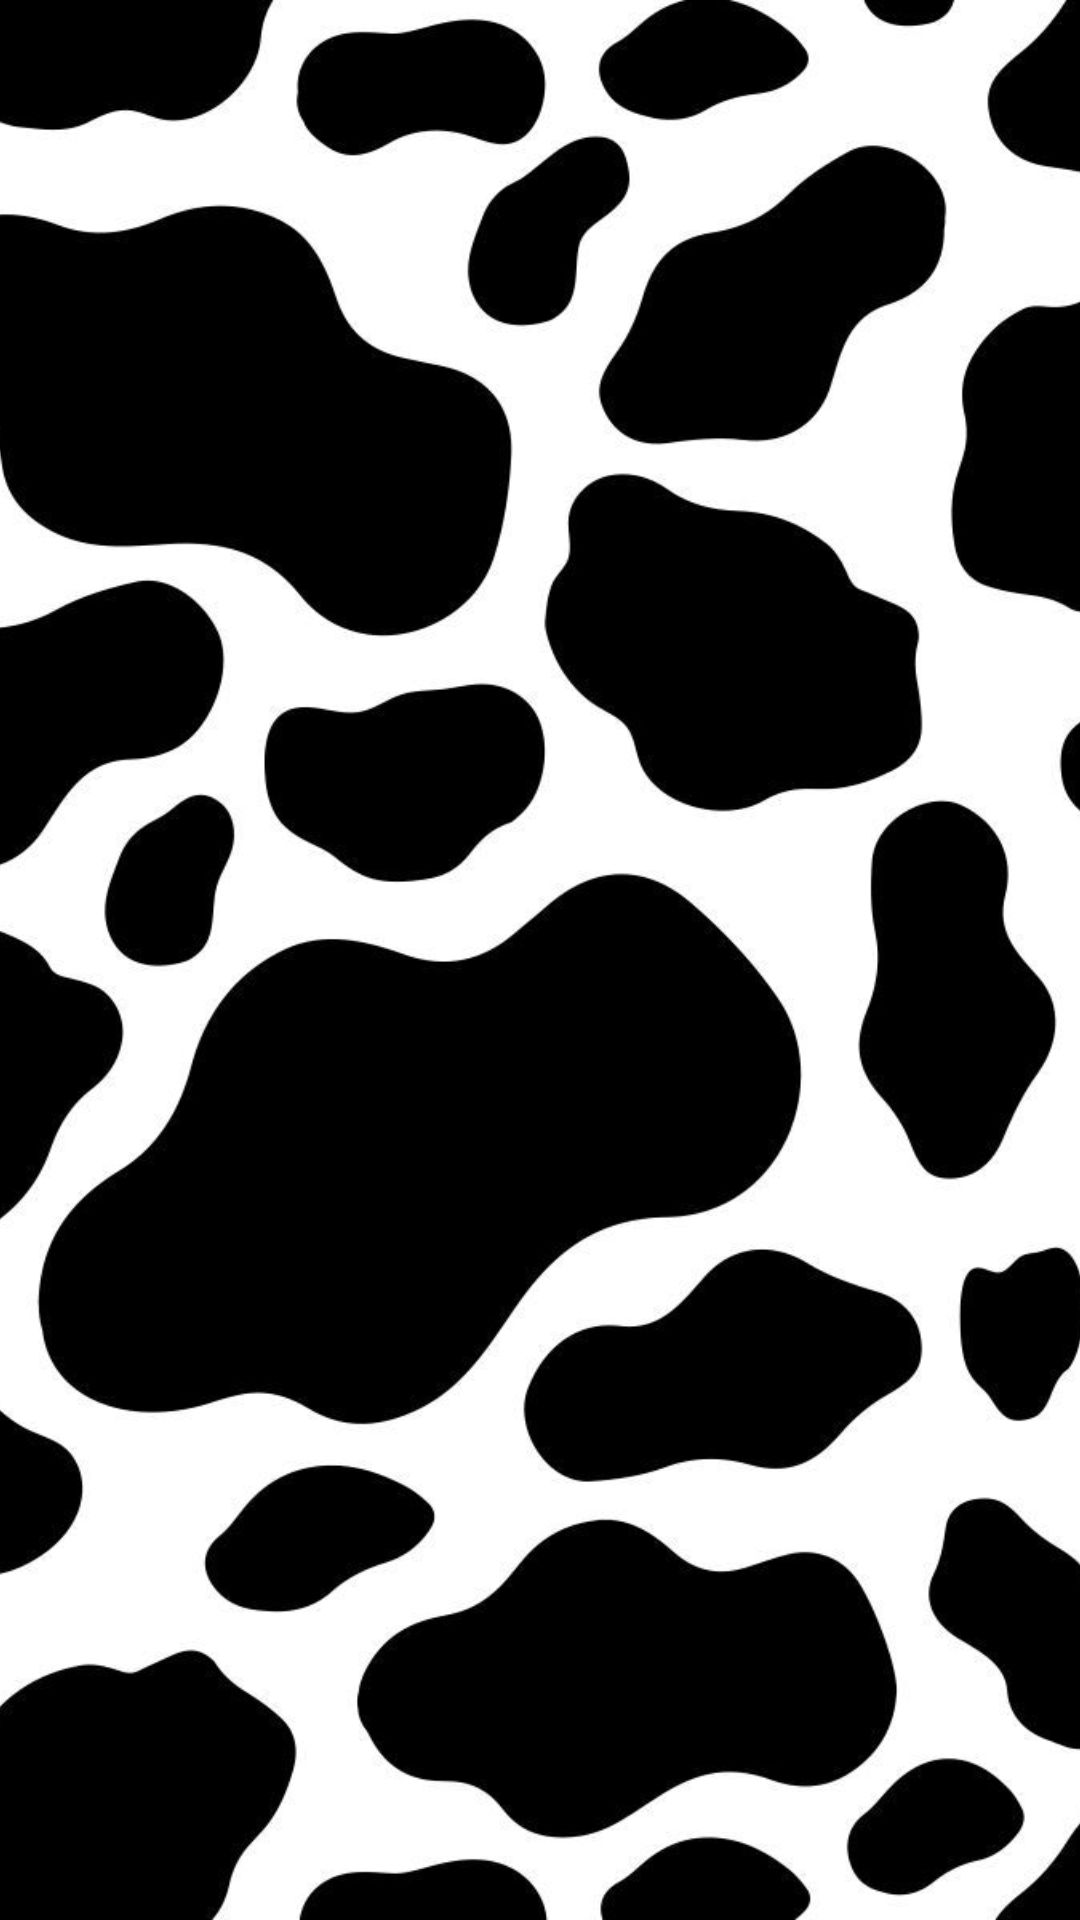 Cow Print Wallpapers - Top 25 Best Cow Print Wallpapers Download